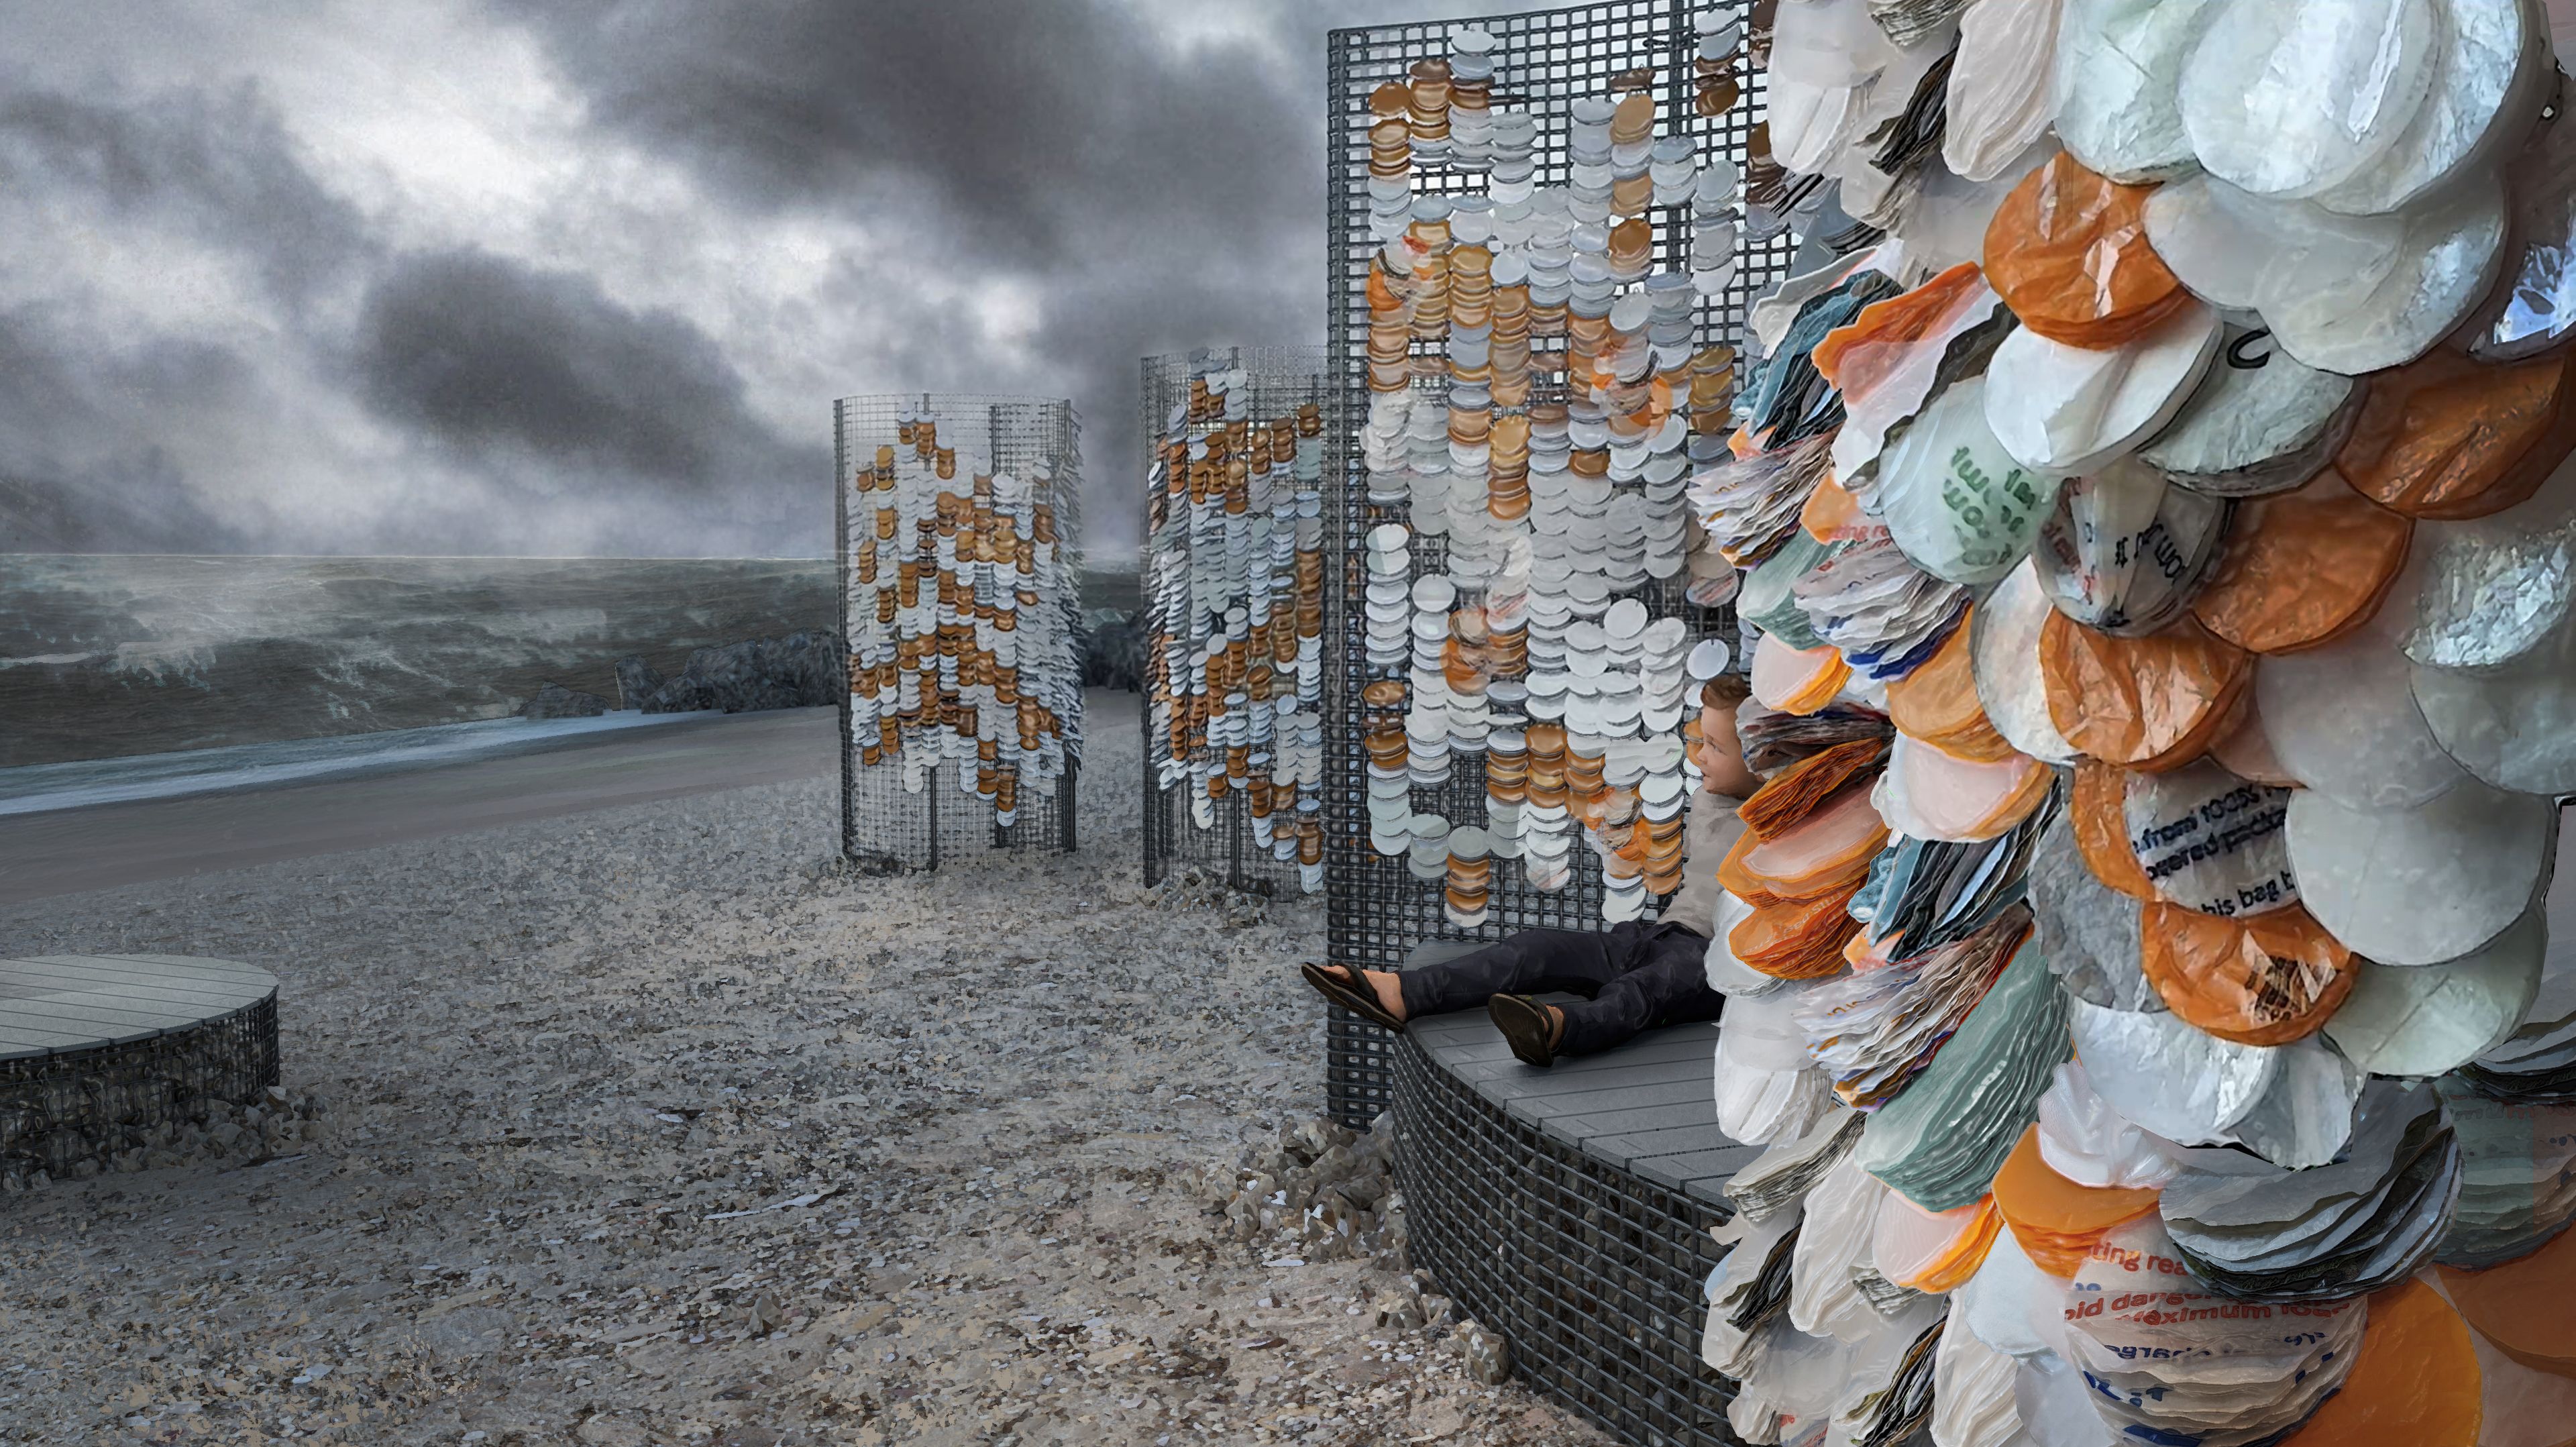 A photograph of tall metal grids covered in discs made from mostly orange and white plastic bags, displayed on a beach. A small child sits next to one. By Teresia Guest